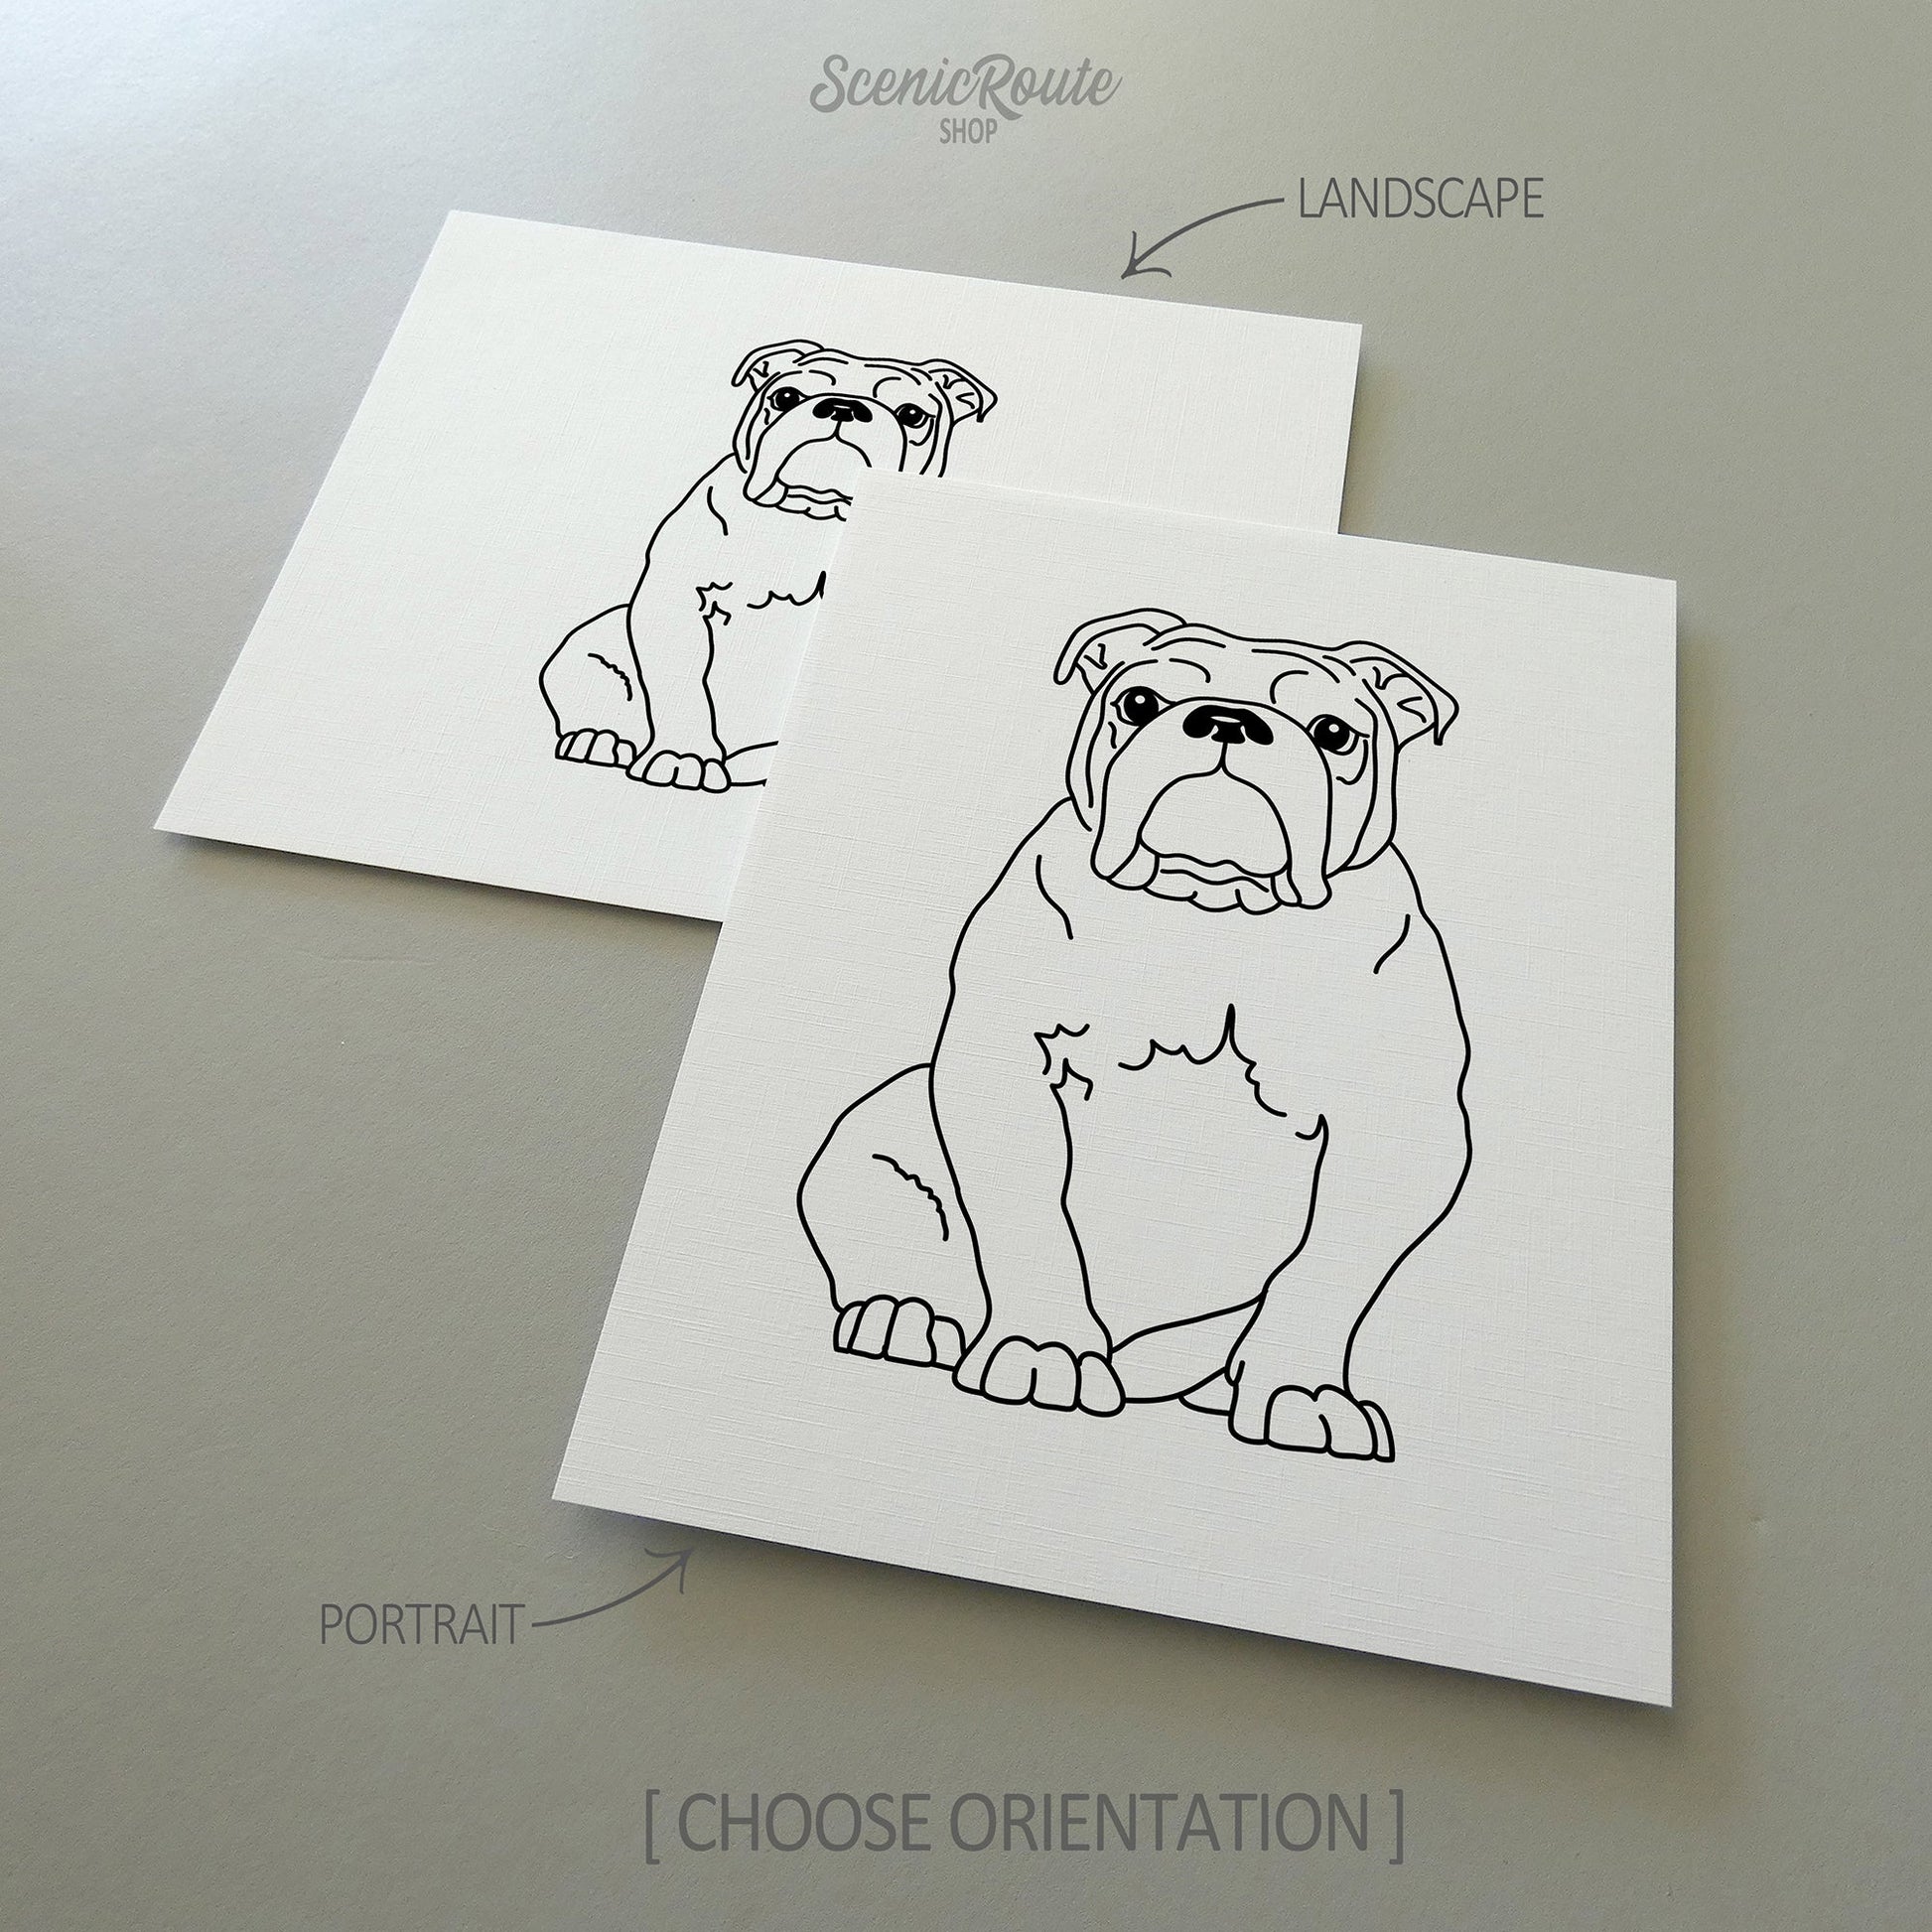 Two drawings of a Bulldog dog on white linen paper with a gray background.  Pieces are shown in portrait and landscape orientation options to illustrate the available art print options.